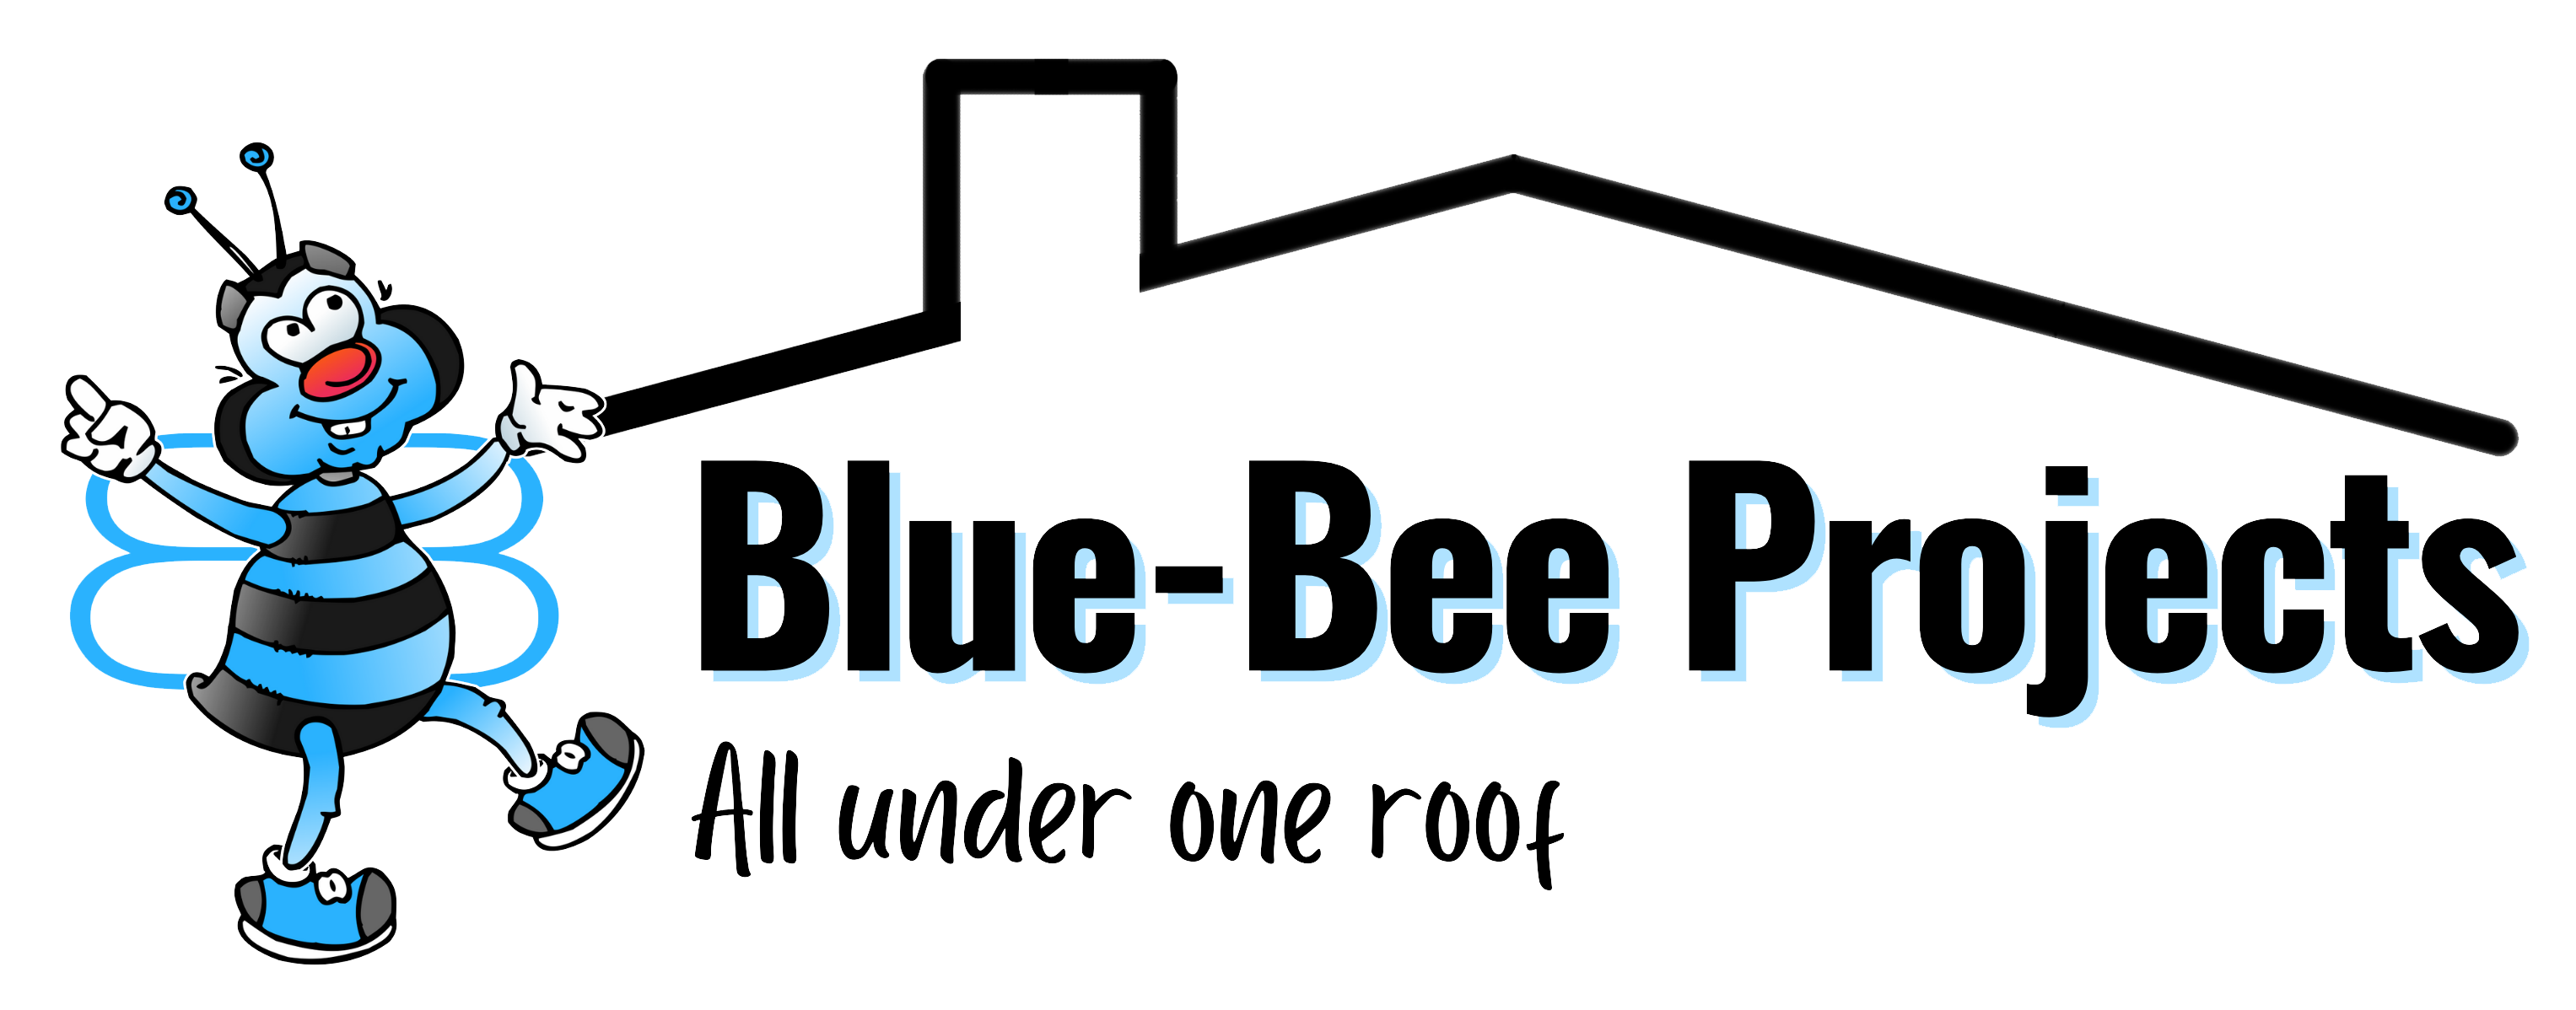 Blue Bee Projects